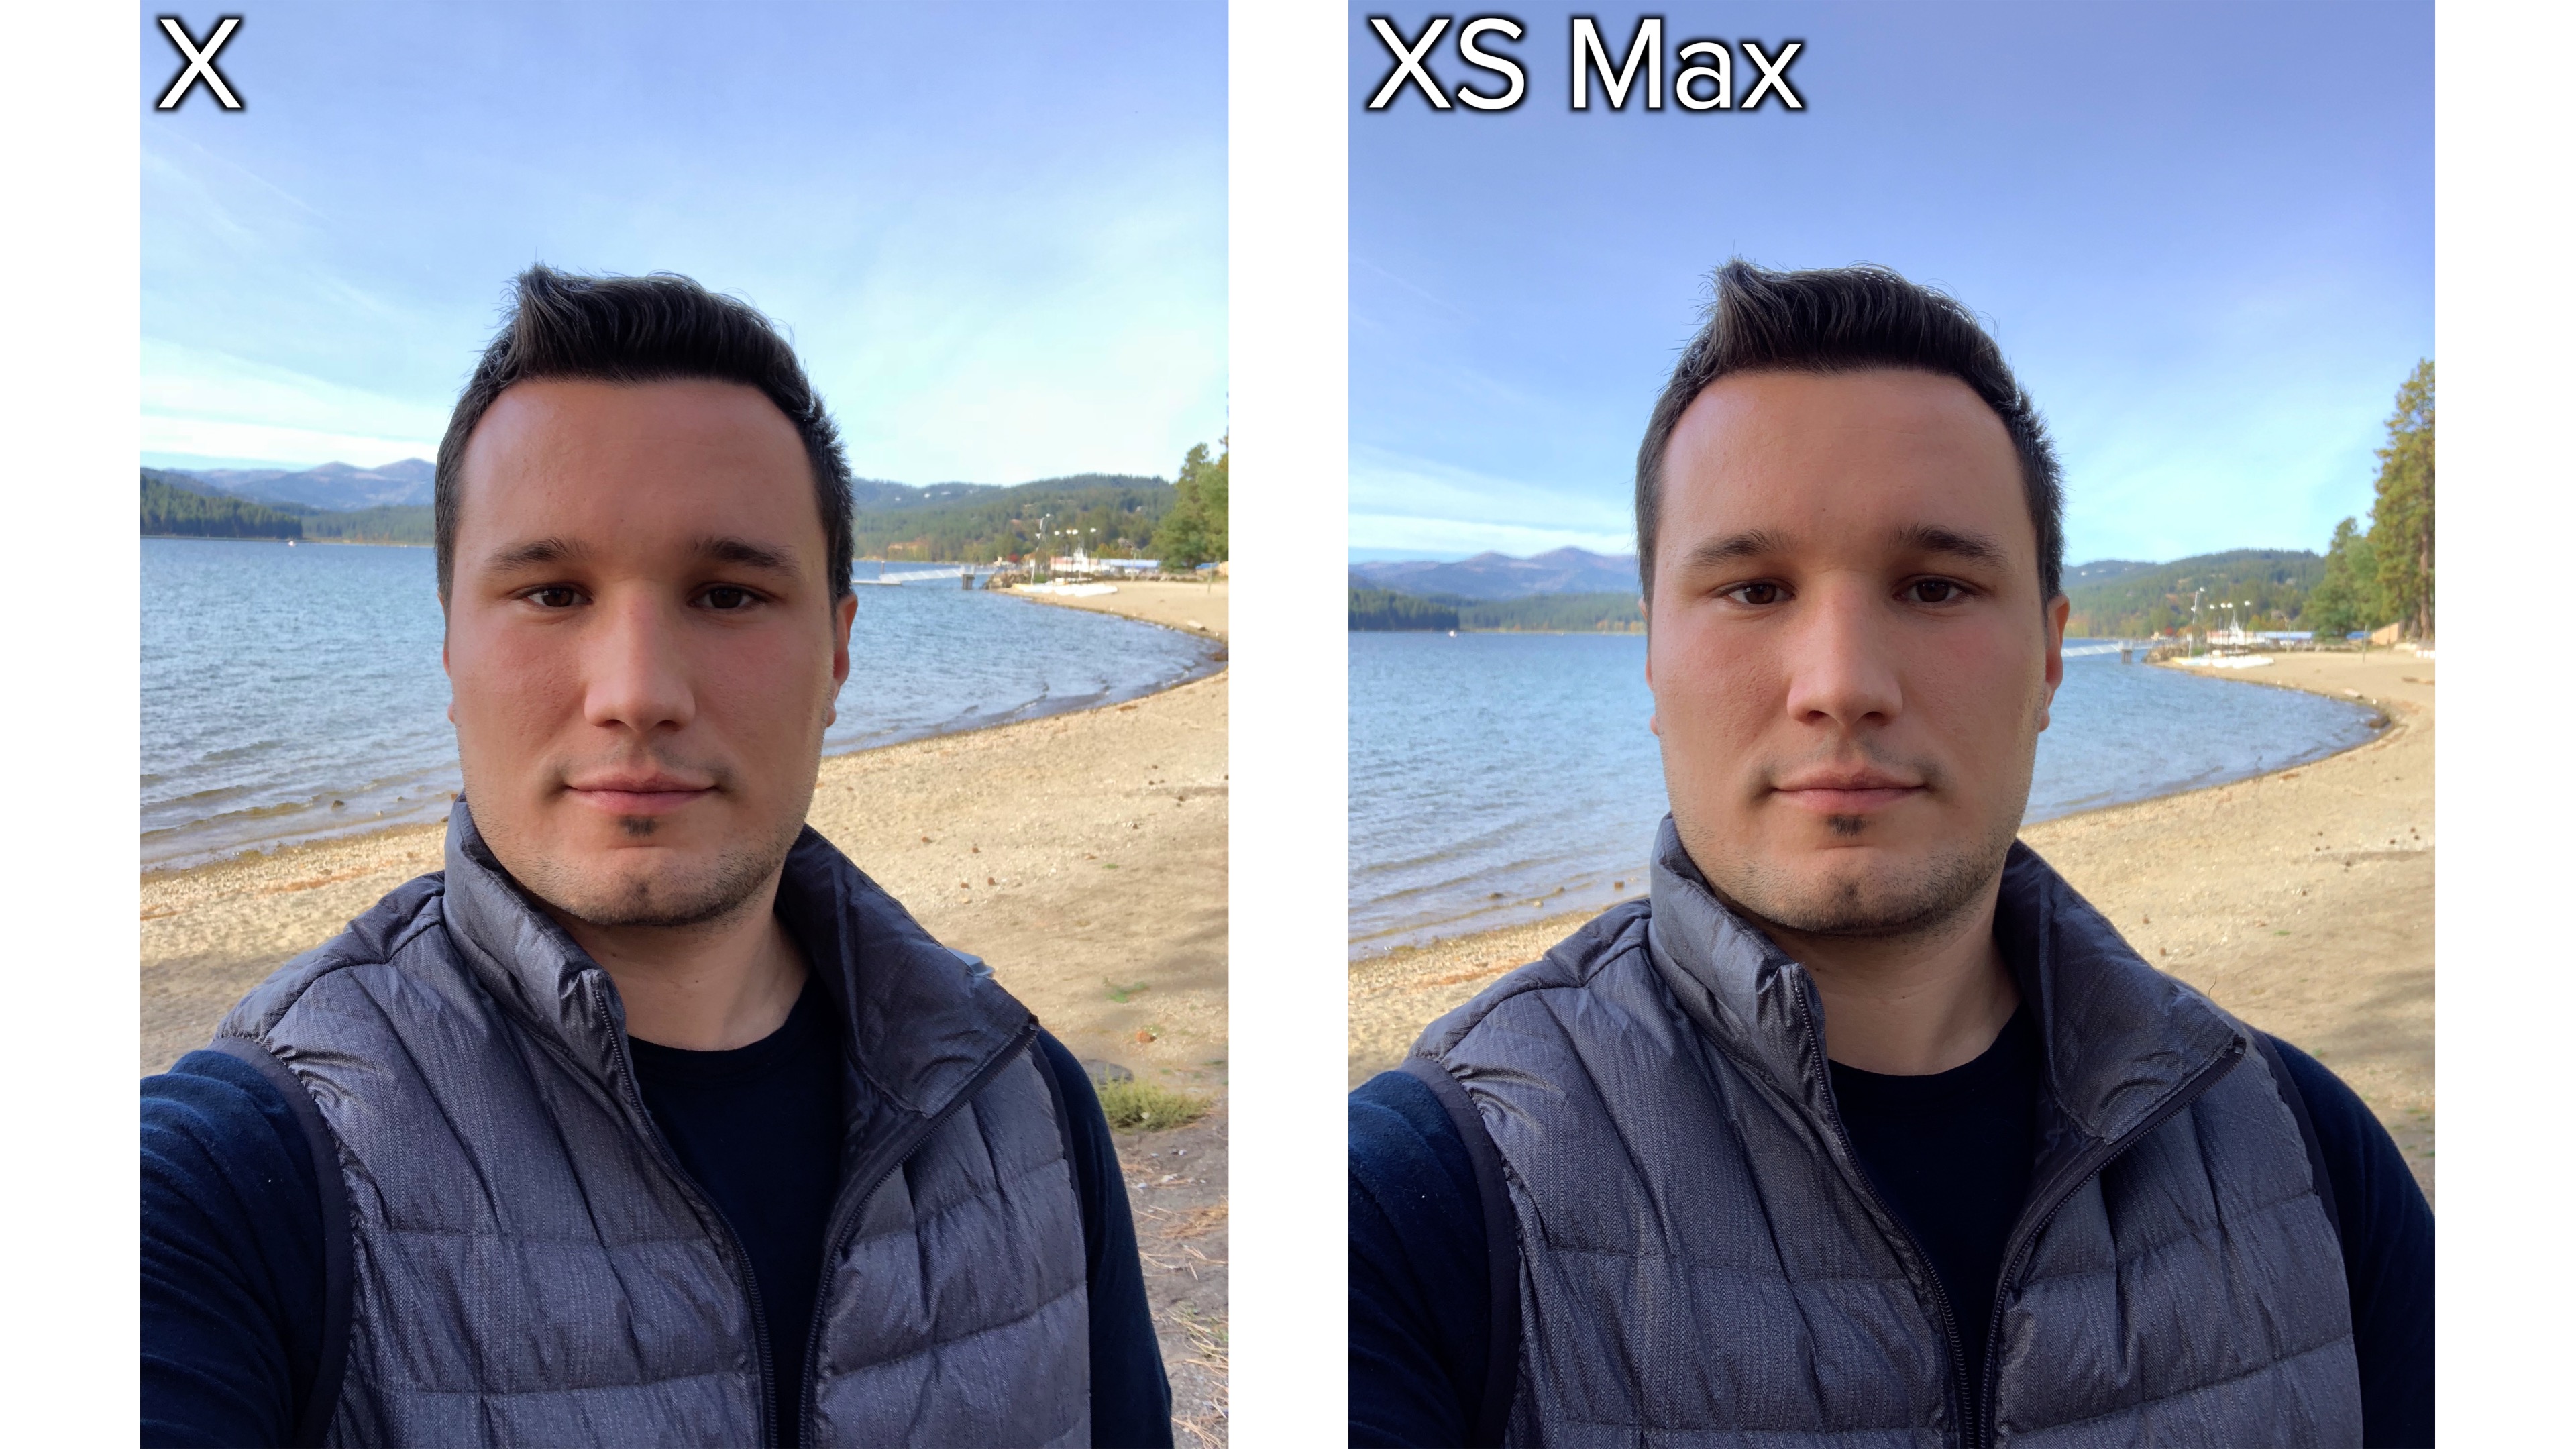 Photo shootout — Comparing the iPhone XS Max versus the iPhone X